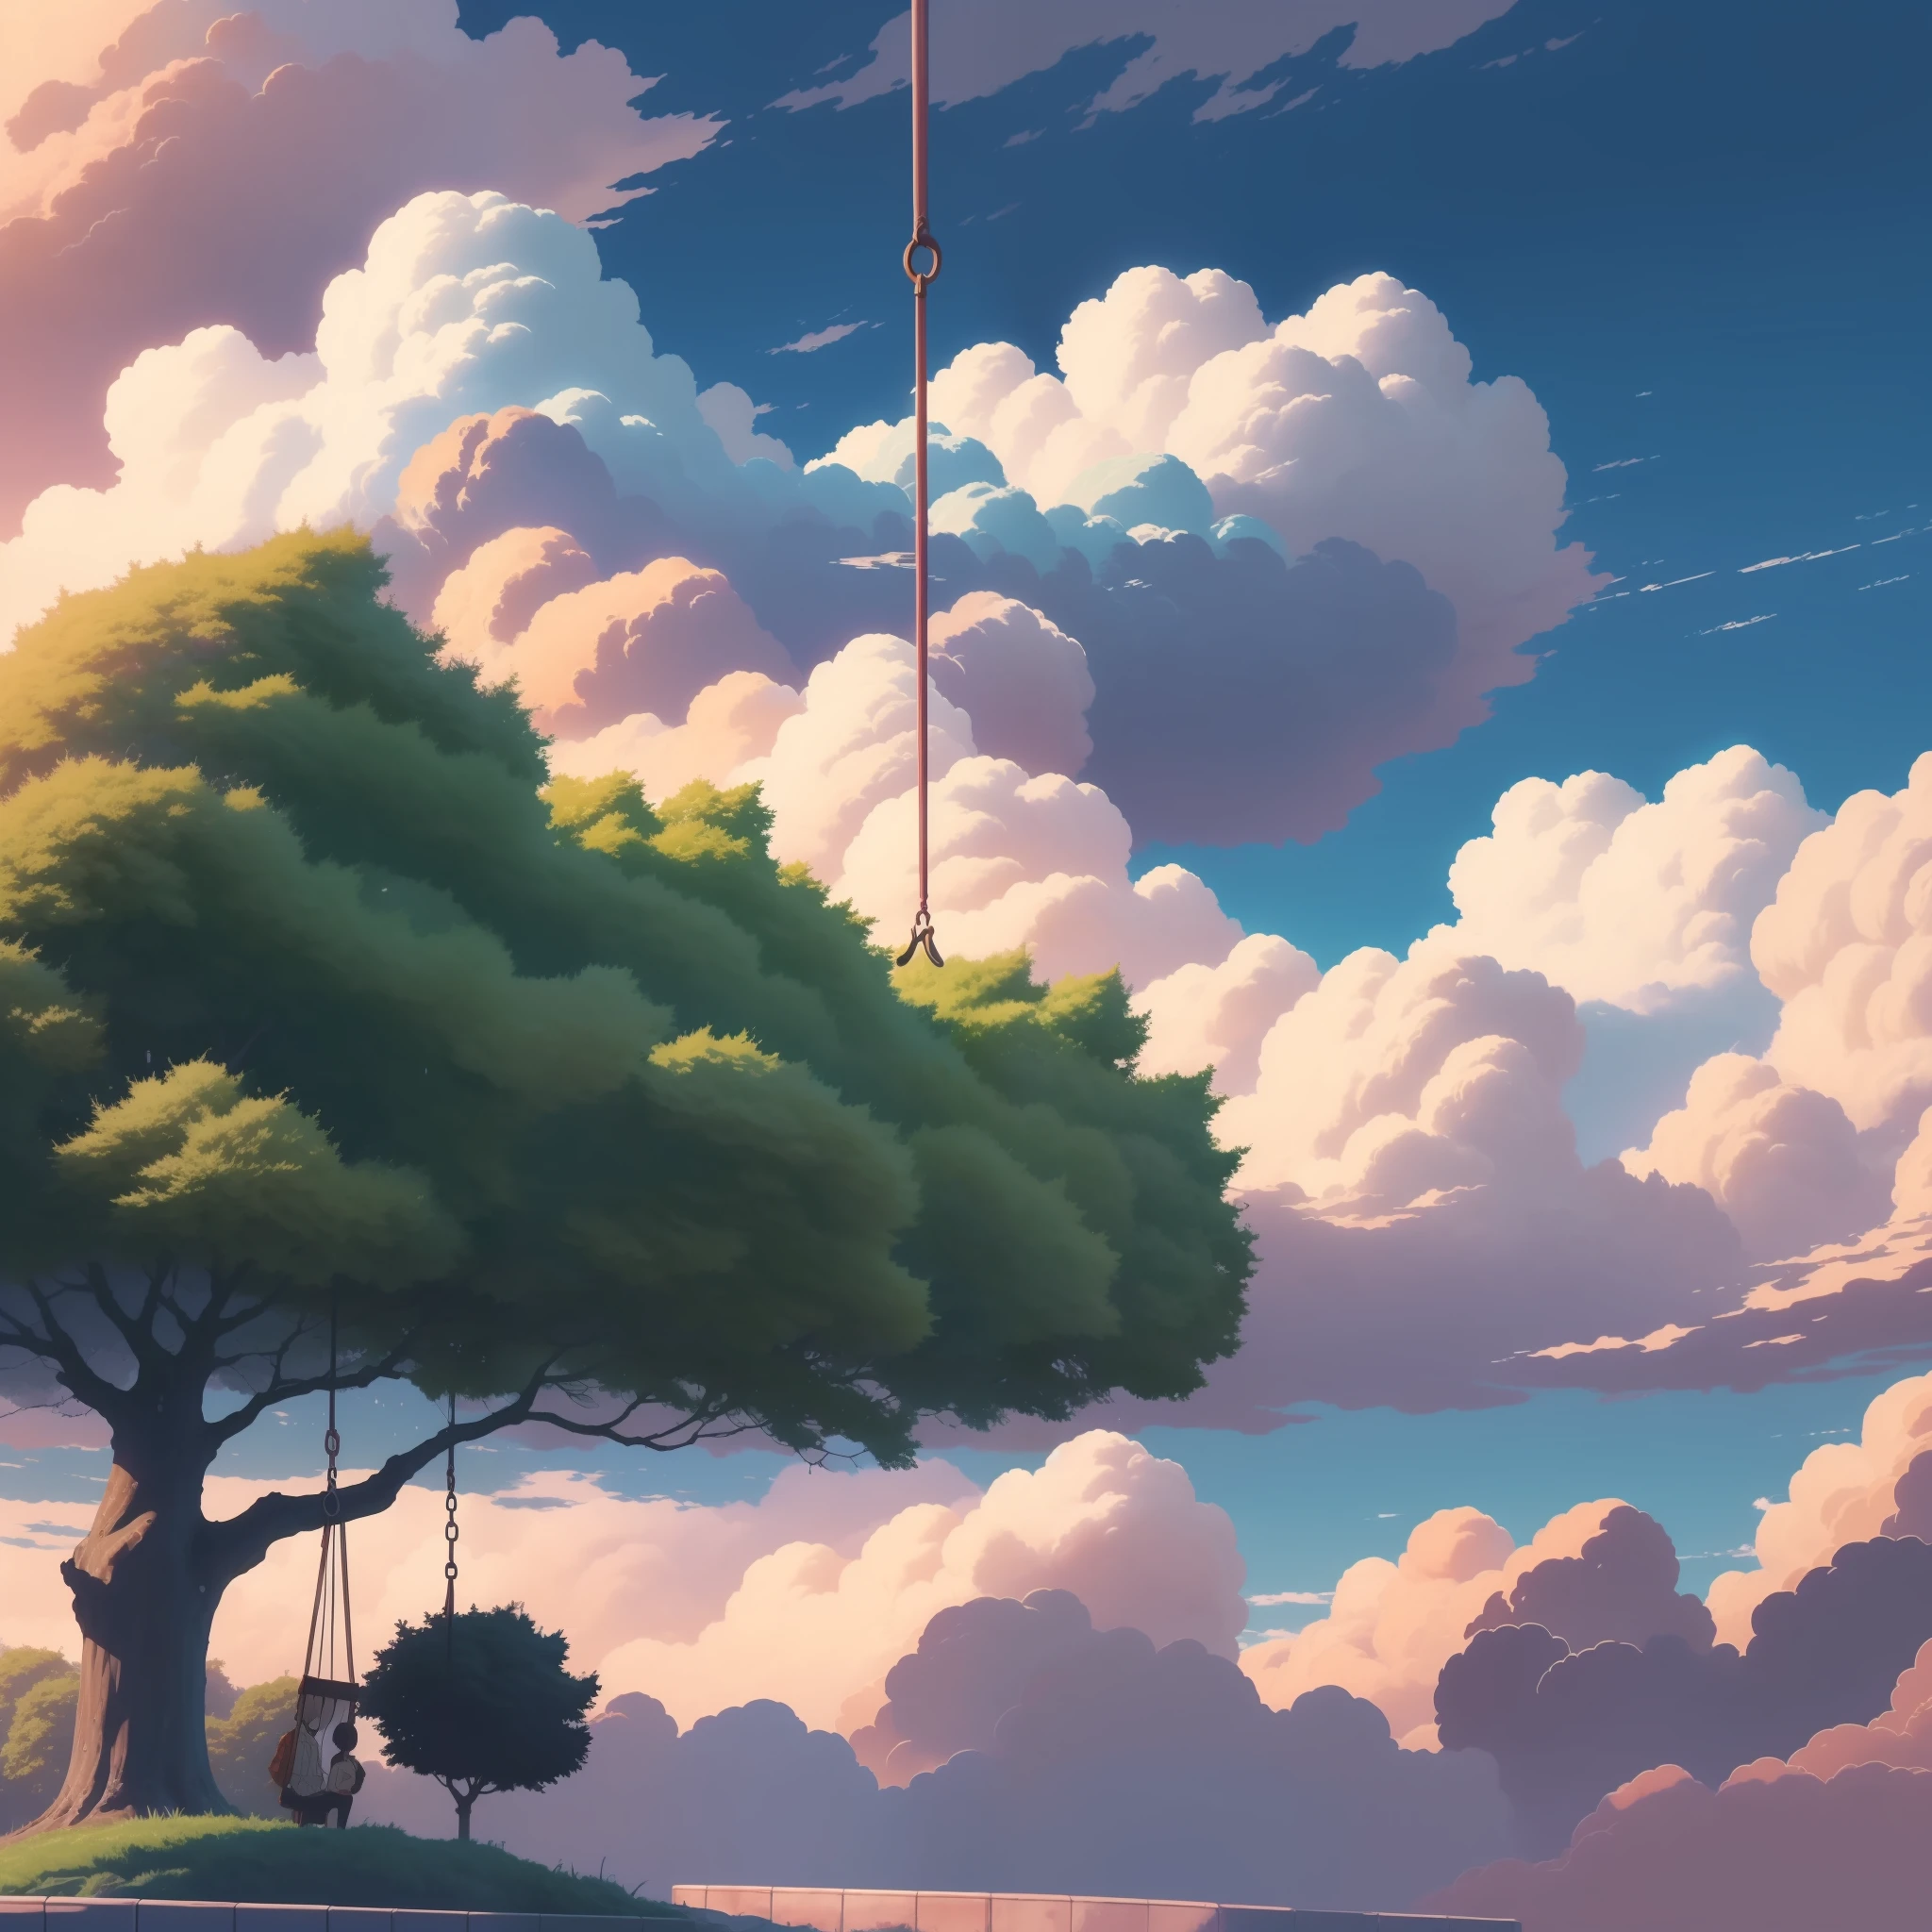 Wallpapers，scenecy，Best quality at best，with blue sky and white clouds，The tree，swing，Anime style，8K，Makoto Shinkai painting style，Anime landscapes，Anime background art